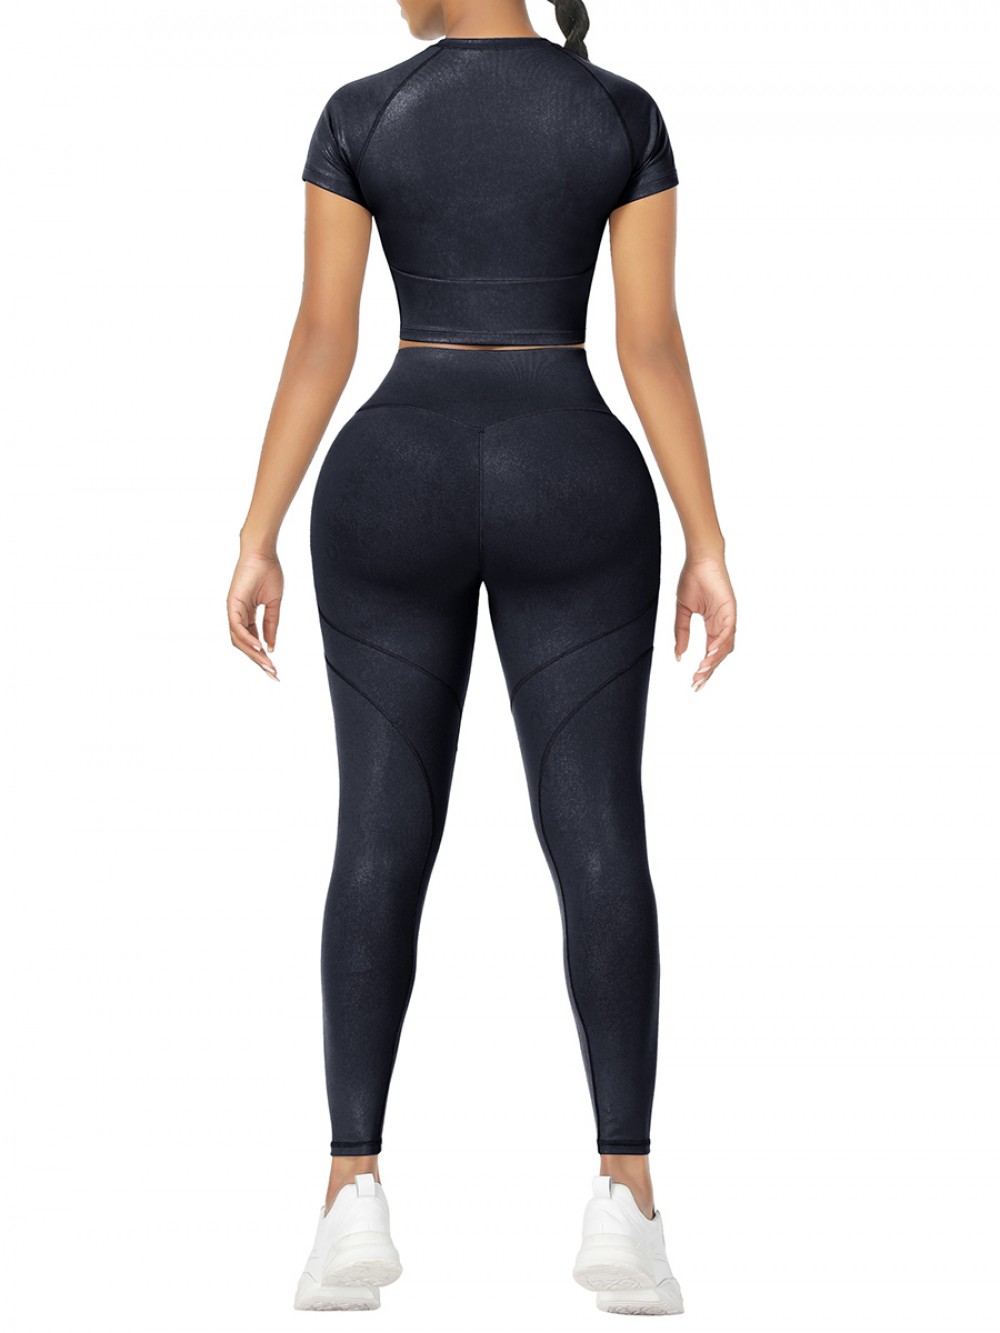 Black Short Sleeves High Waist Yoga Suits Outdoor Activity